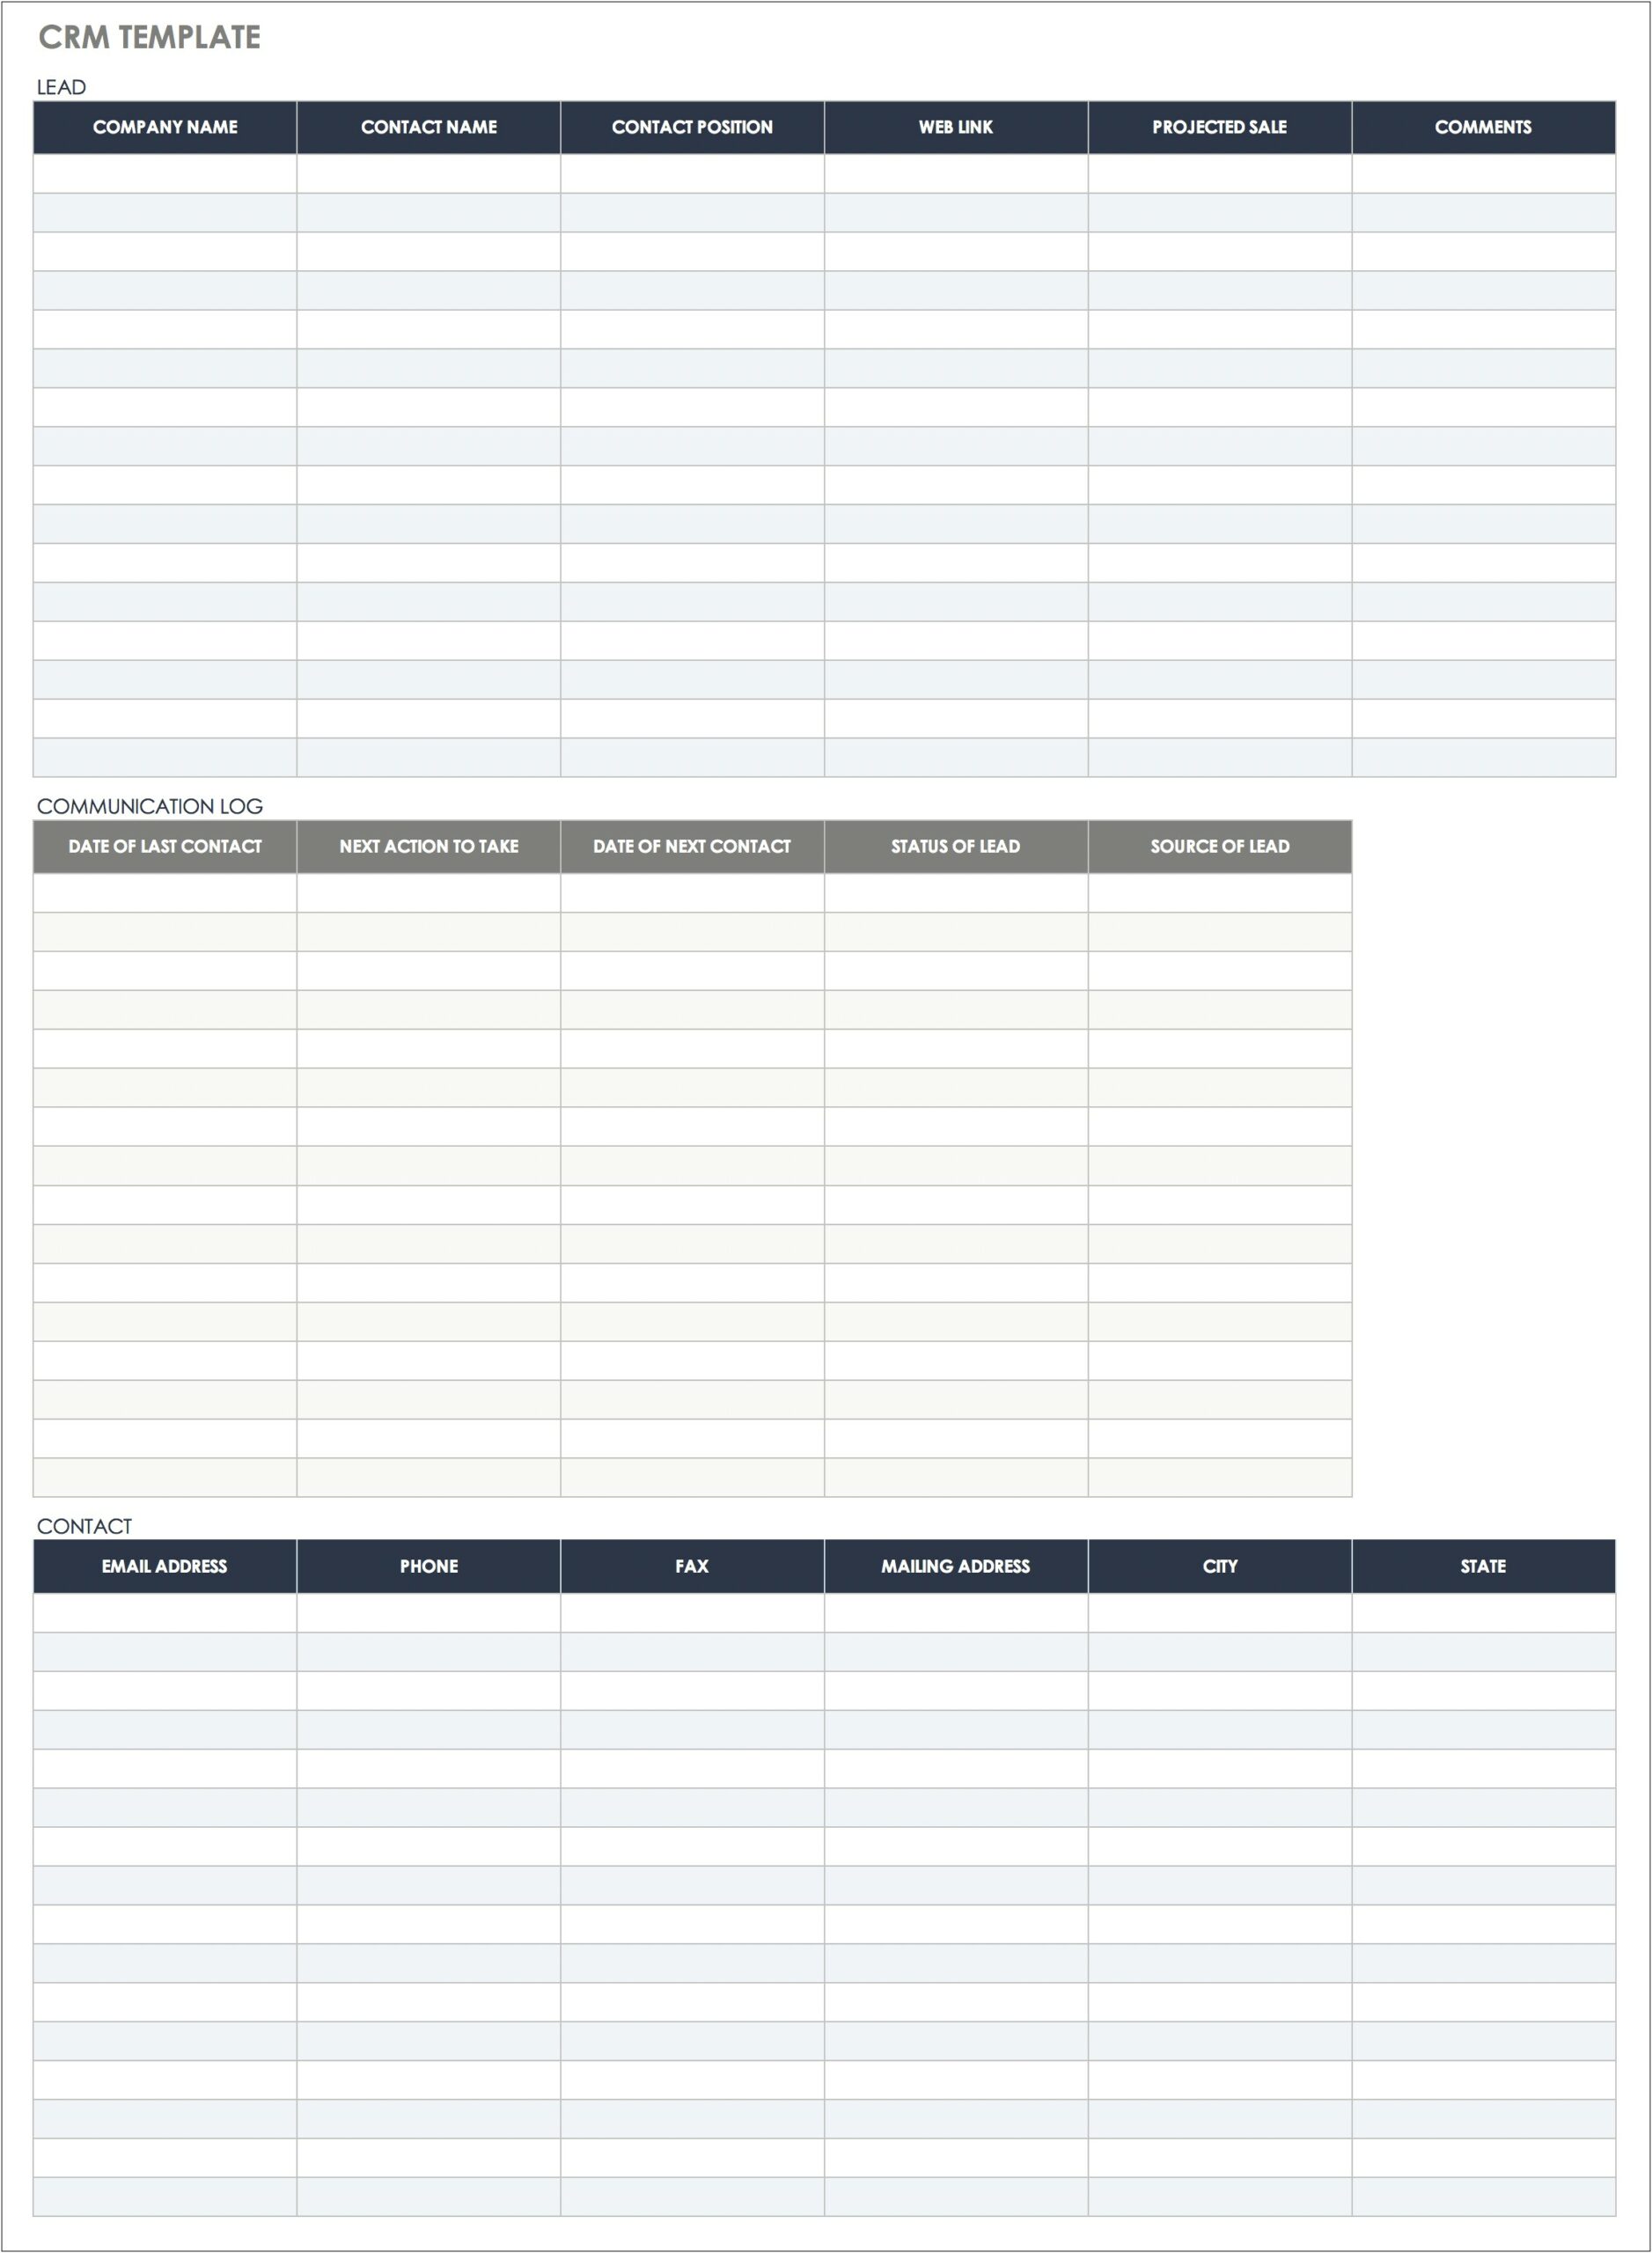 Free Crm Templates For Google Sheets